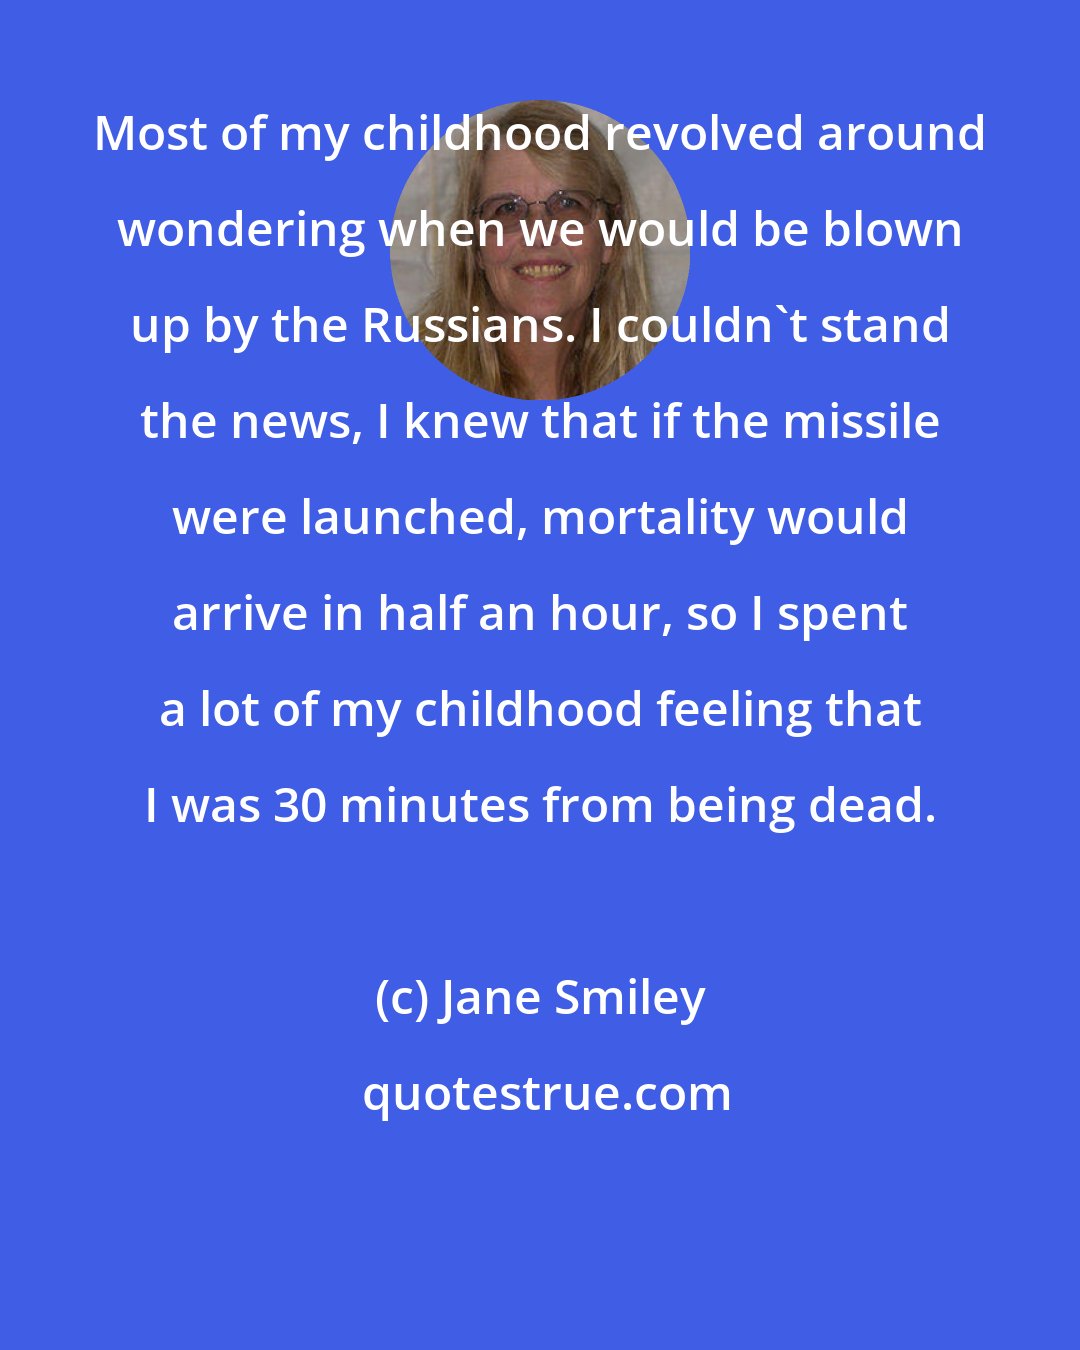 Jane Smiley: Most of my childhood revolved around wondering when we would be blown up by the Russians. I couldn't stand the news, I knew that if the missile were launched, mortality would arrive in half an hour, so I spent a lot of my childhood feeling that I was 30 minutes from being dead.